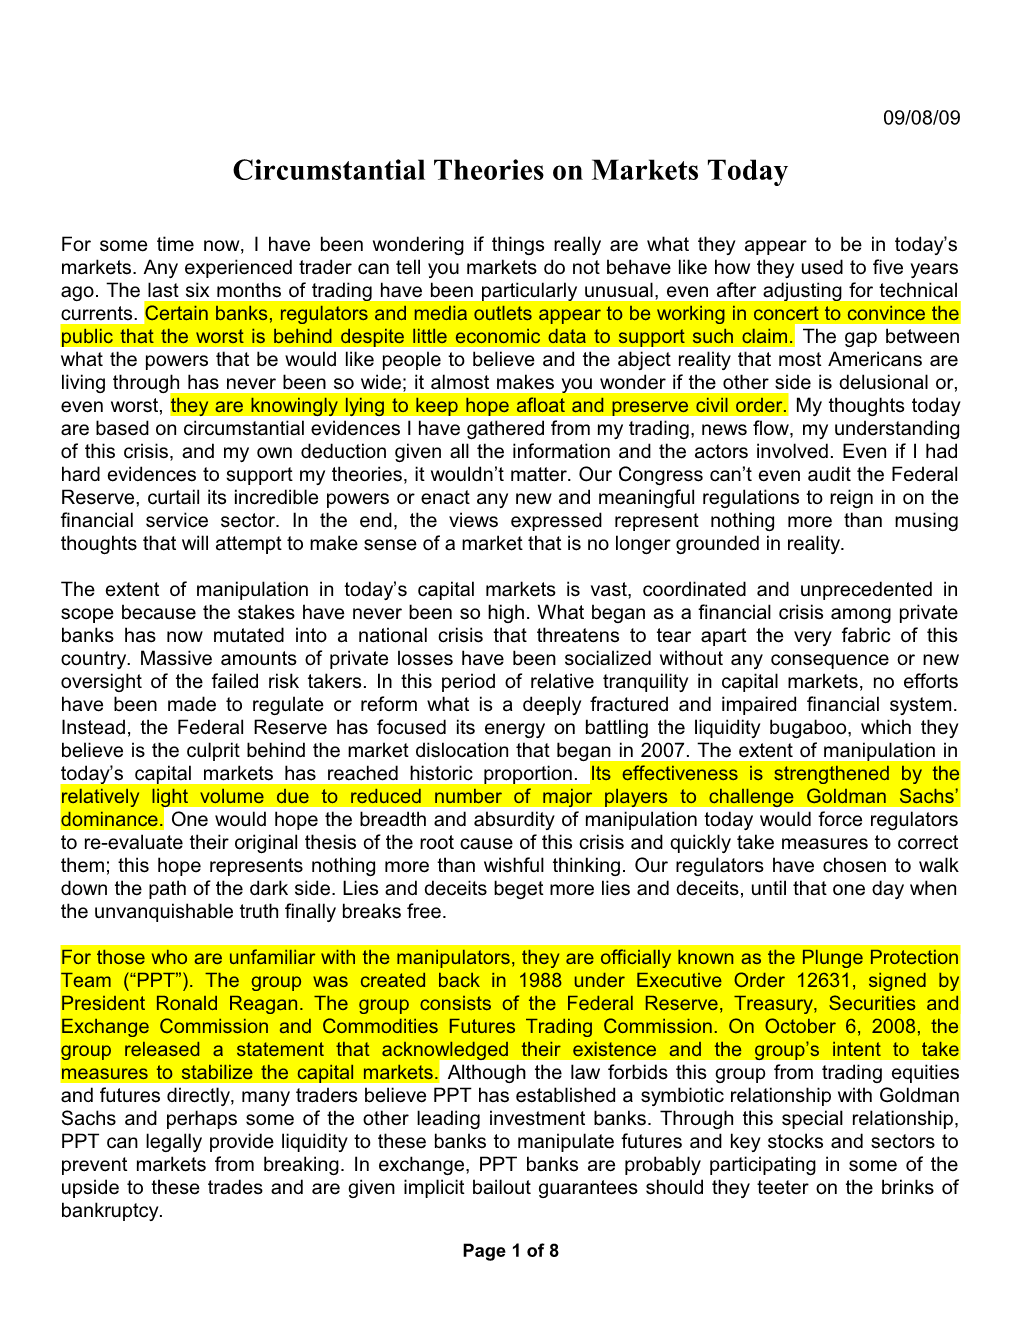 Circumstantial Theories on Markets Today